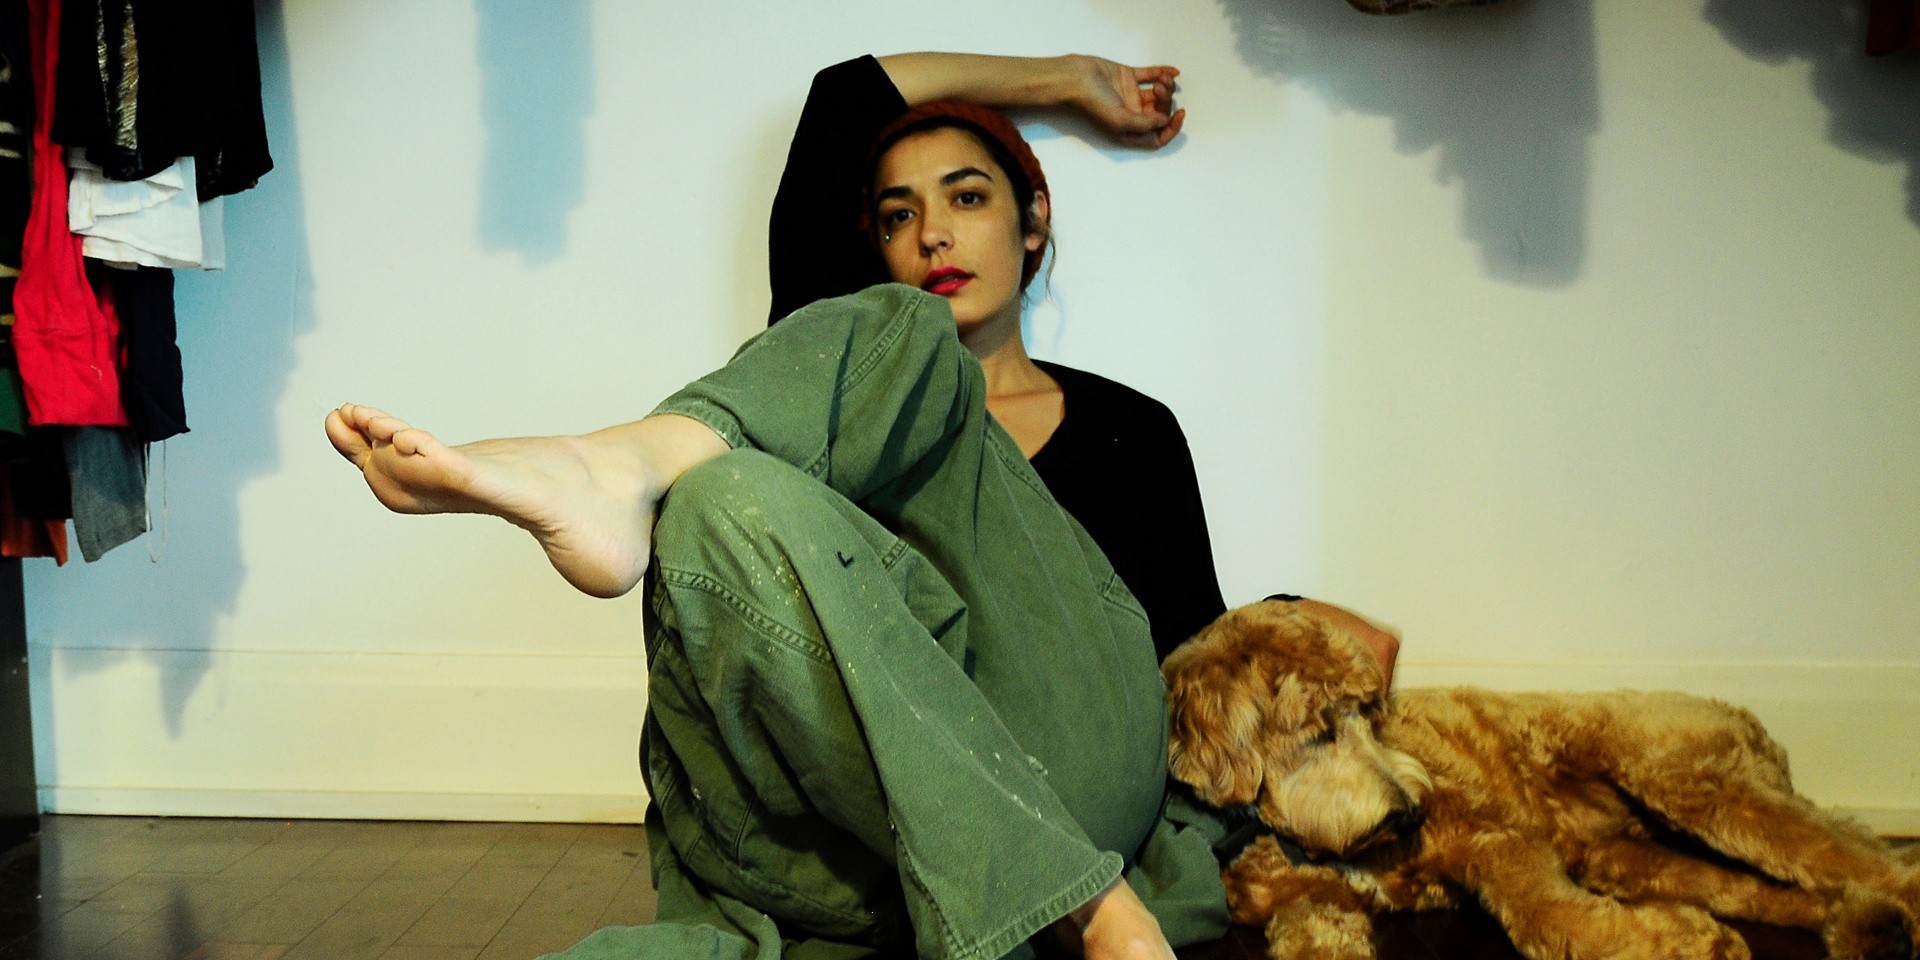 ALBUM REVIEW: jennylee - Right On!